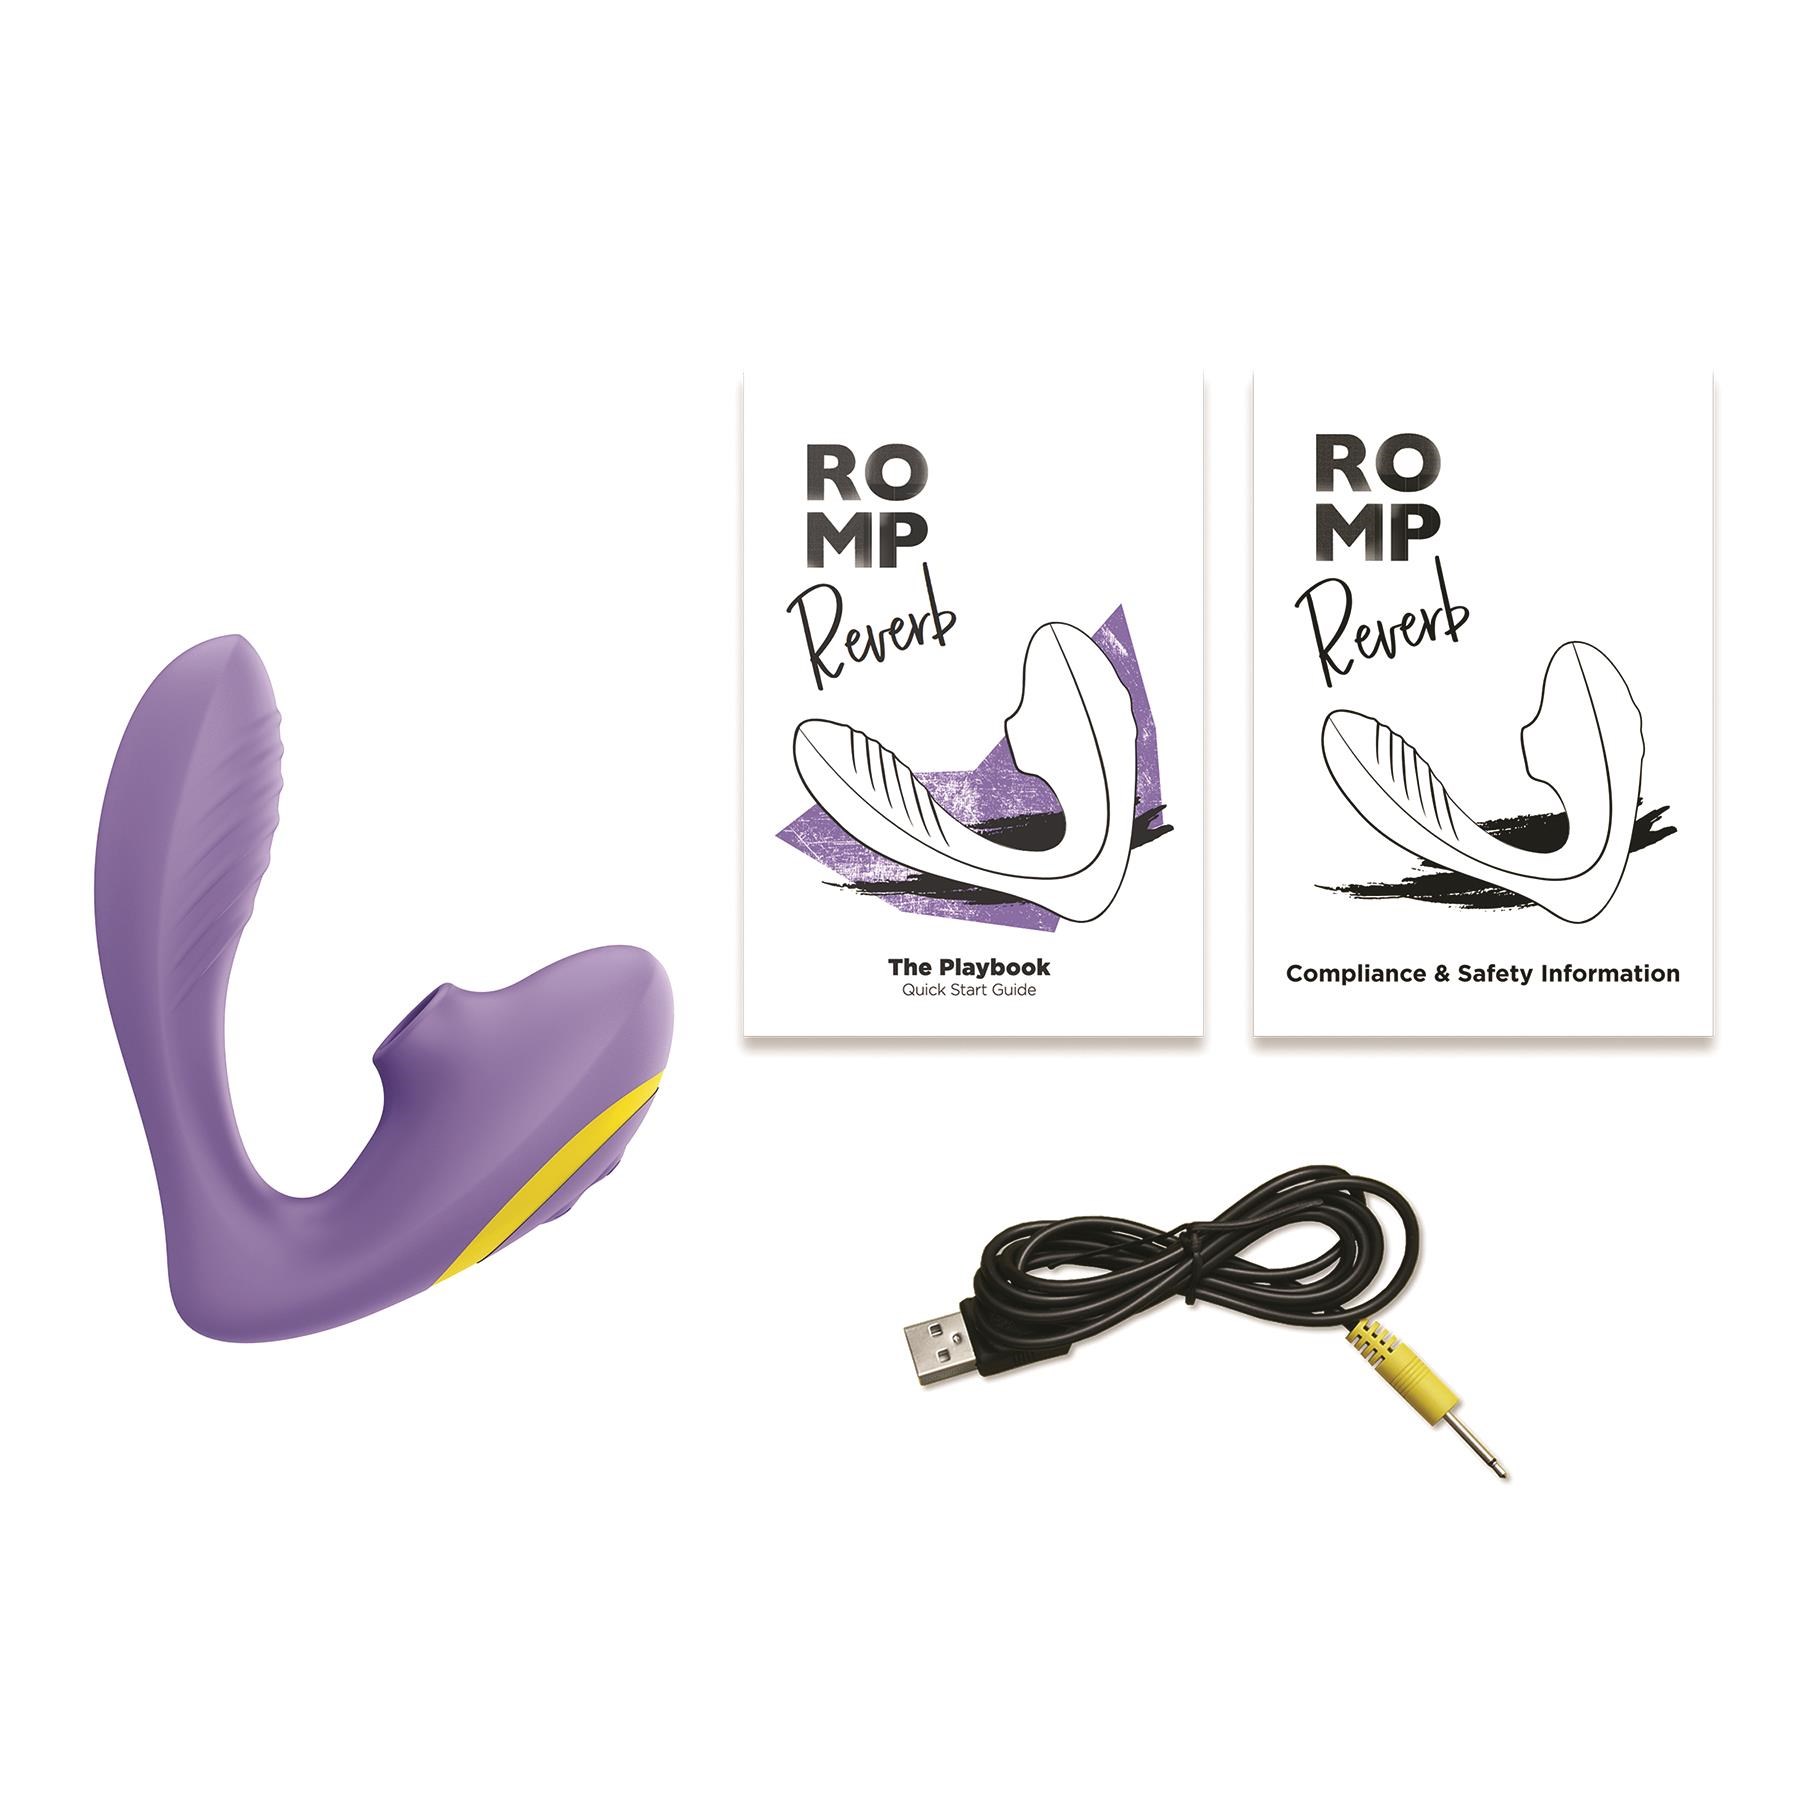 Romp Reverb G-Spot And Clitoral Suction Stimulator - All Components